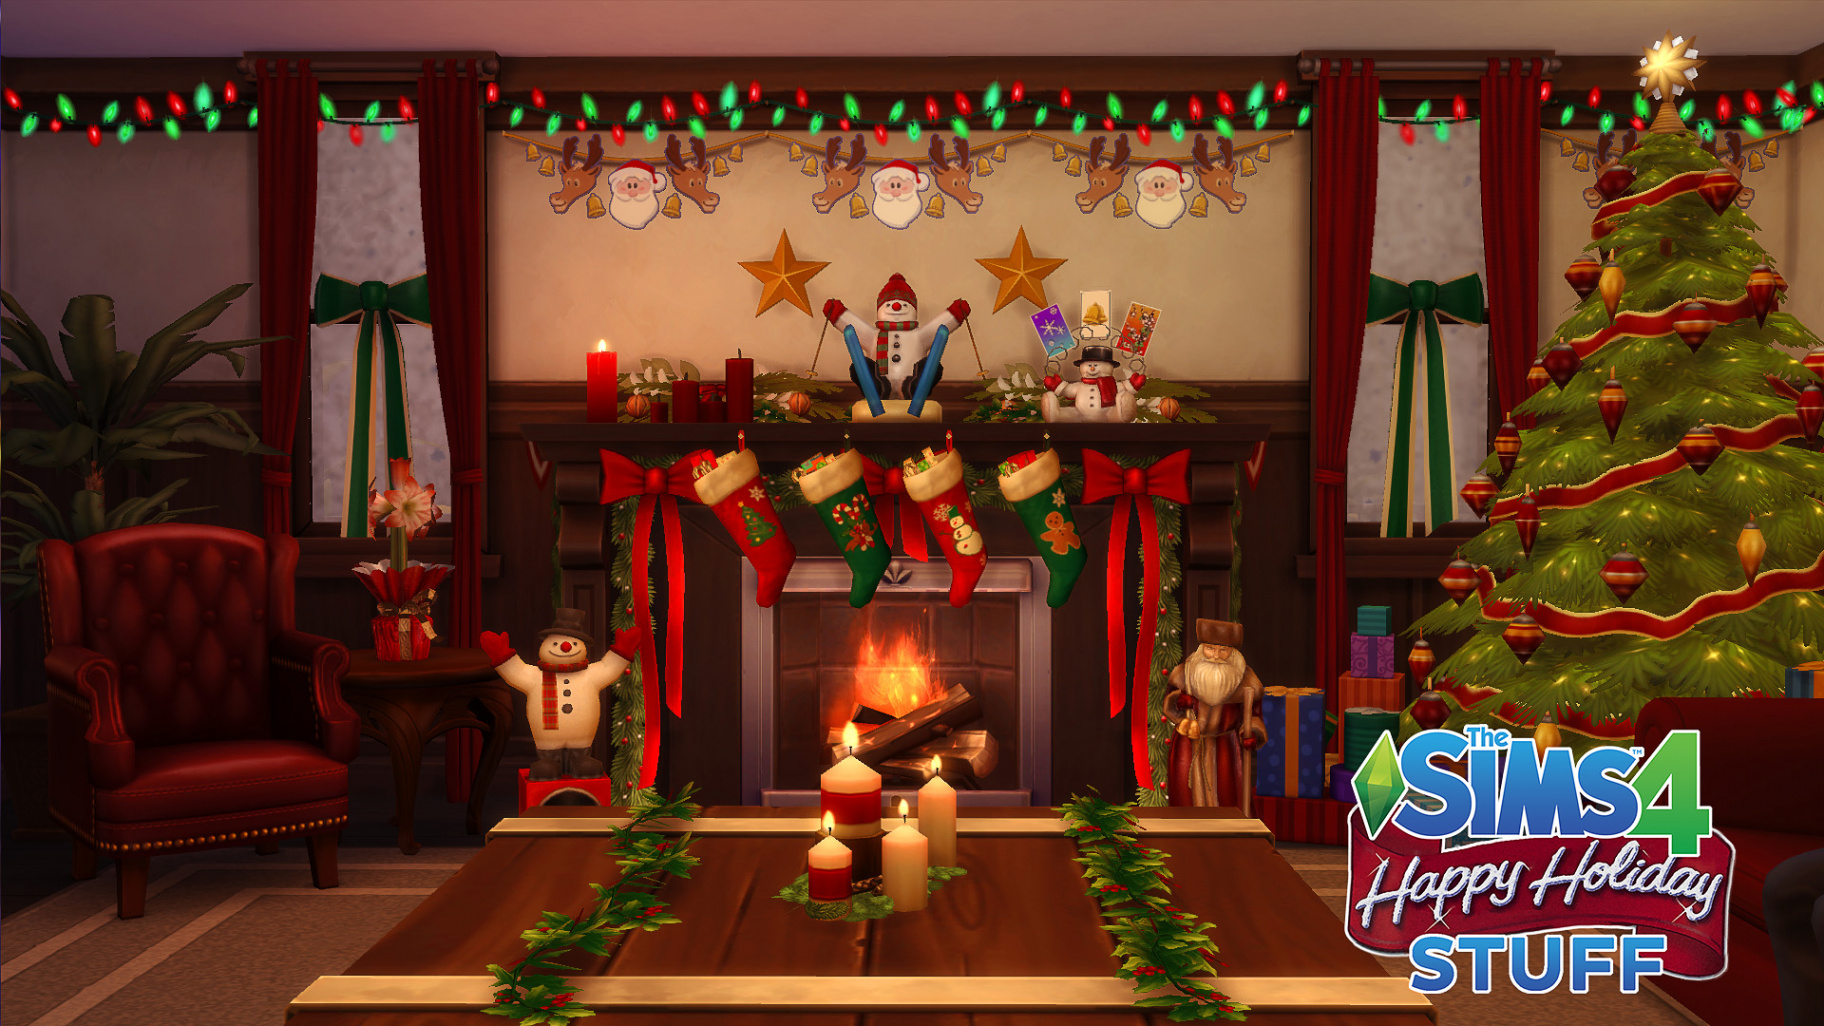 The Sims  Happy Holiday Stuff! by simsi5 - Liquid Sims